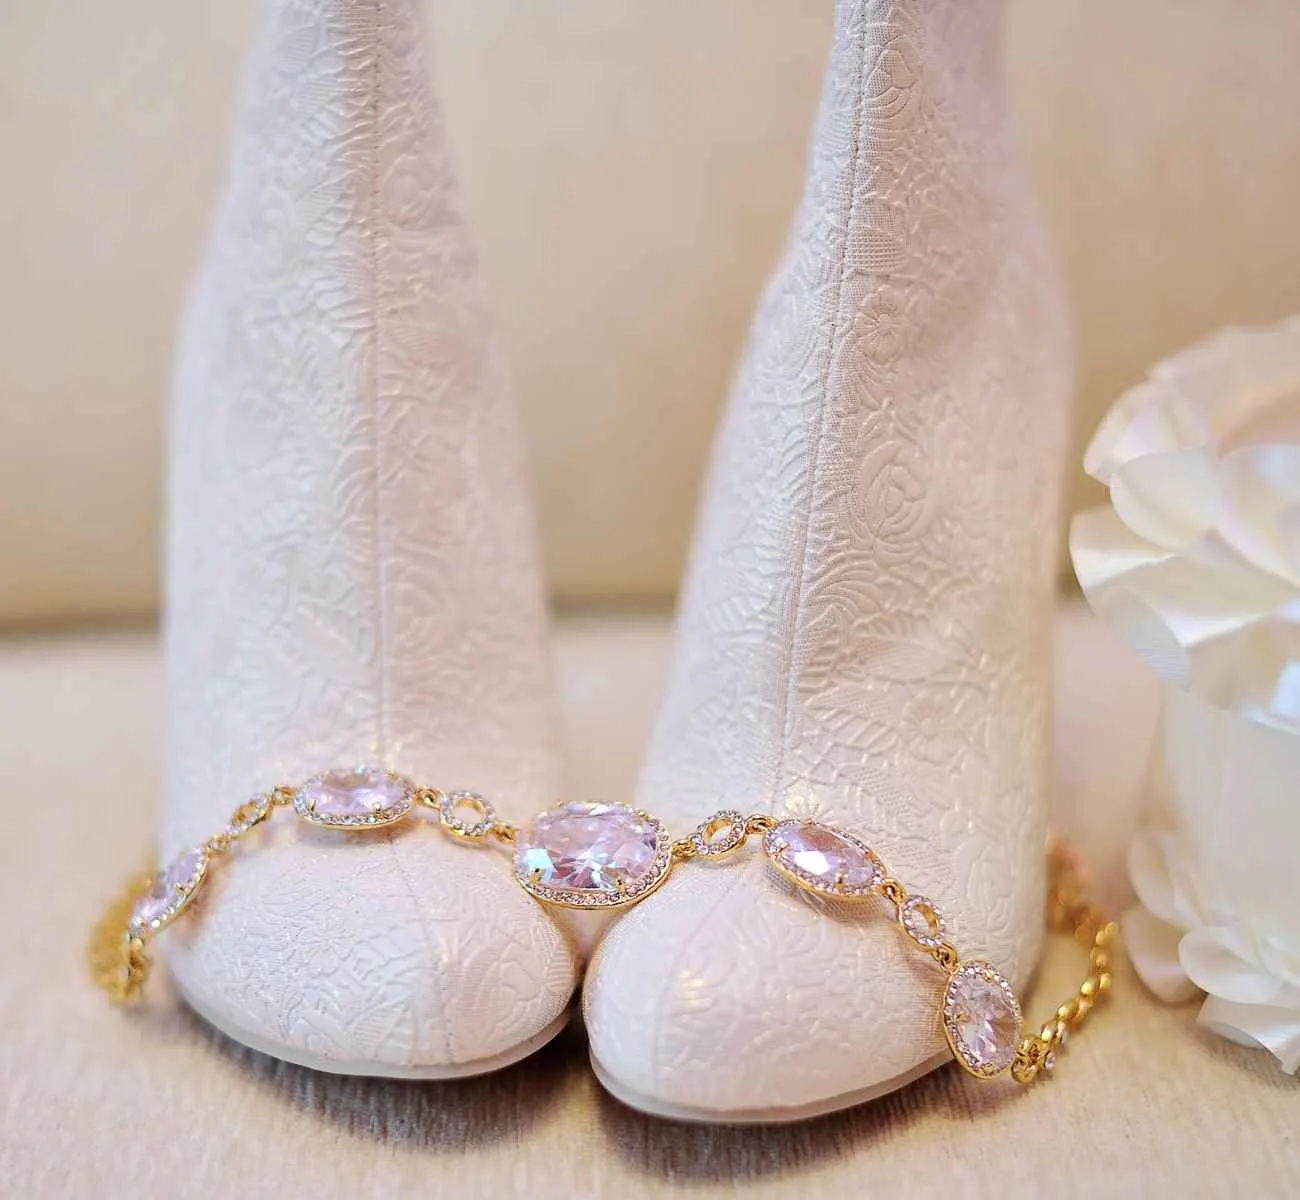 White brocade wedding ankle boots on table with necklace laid on top.